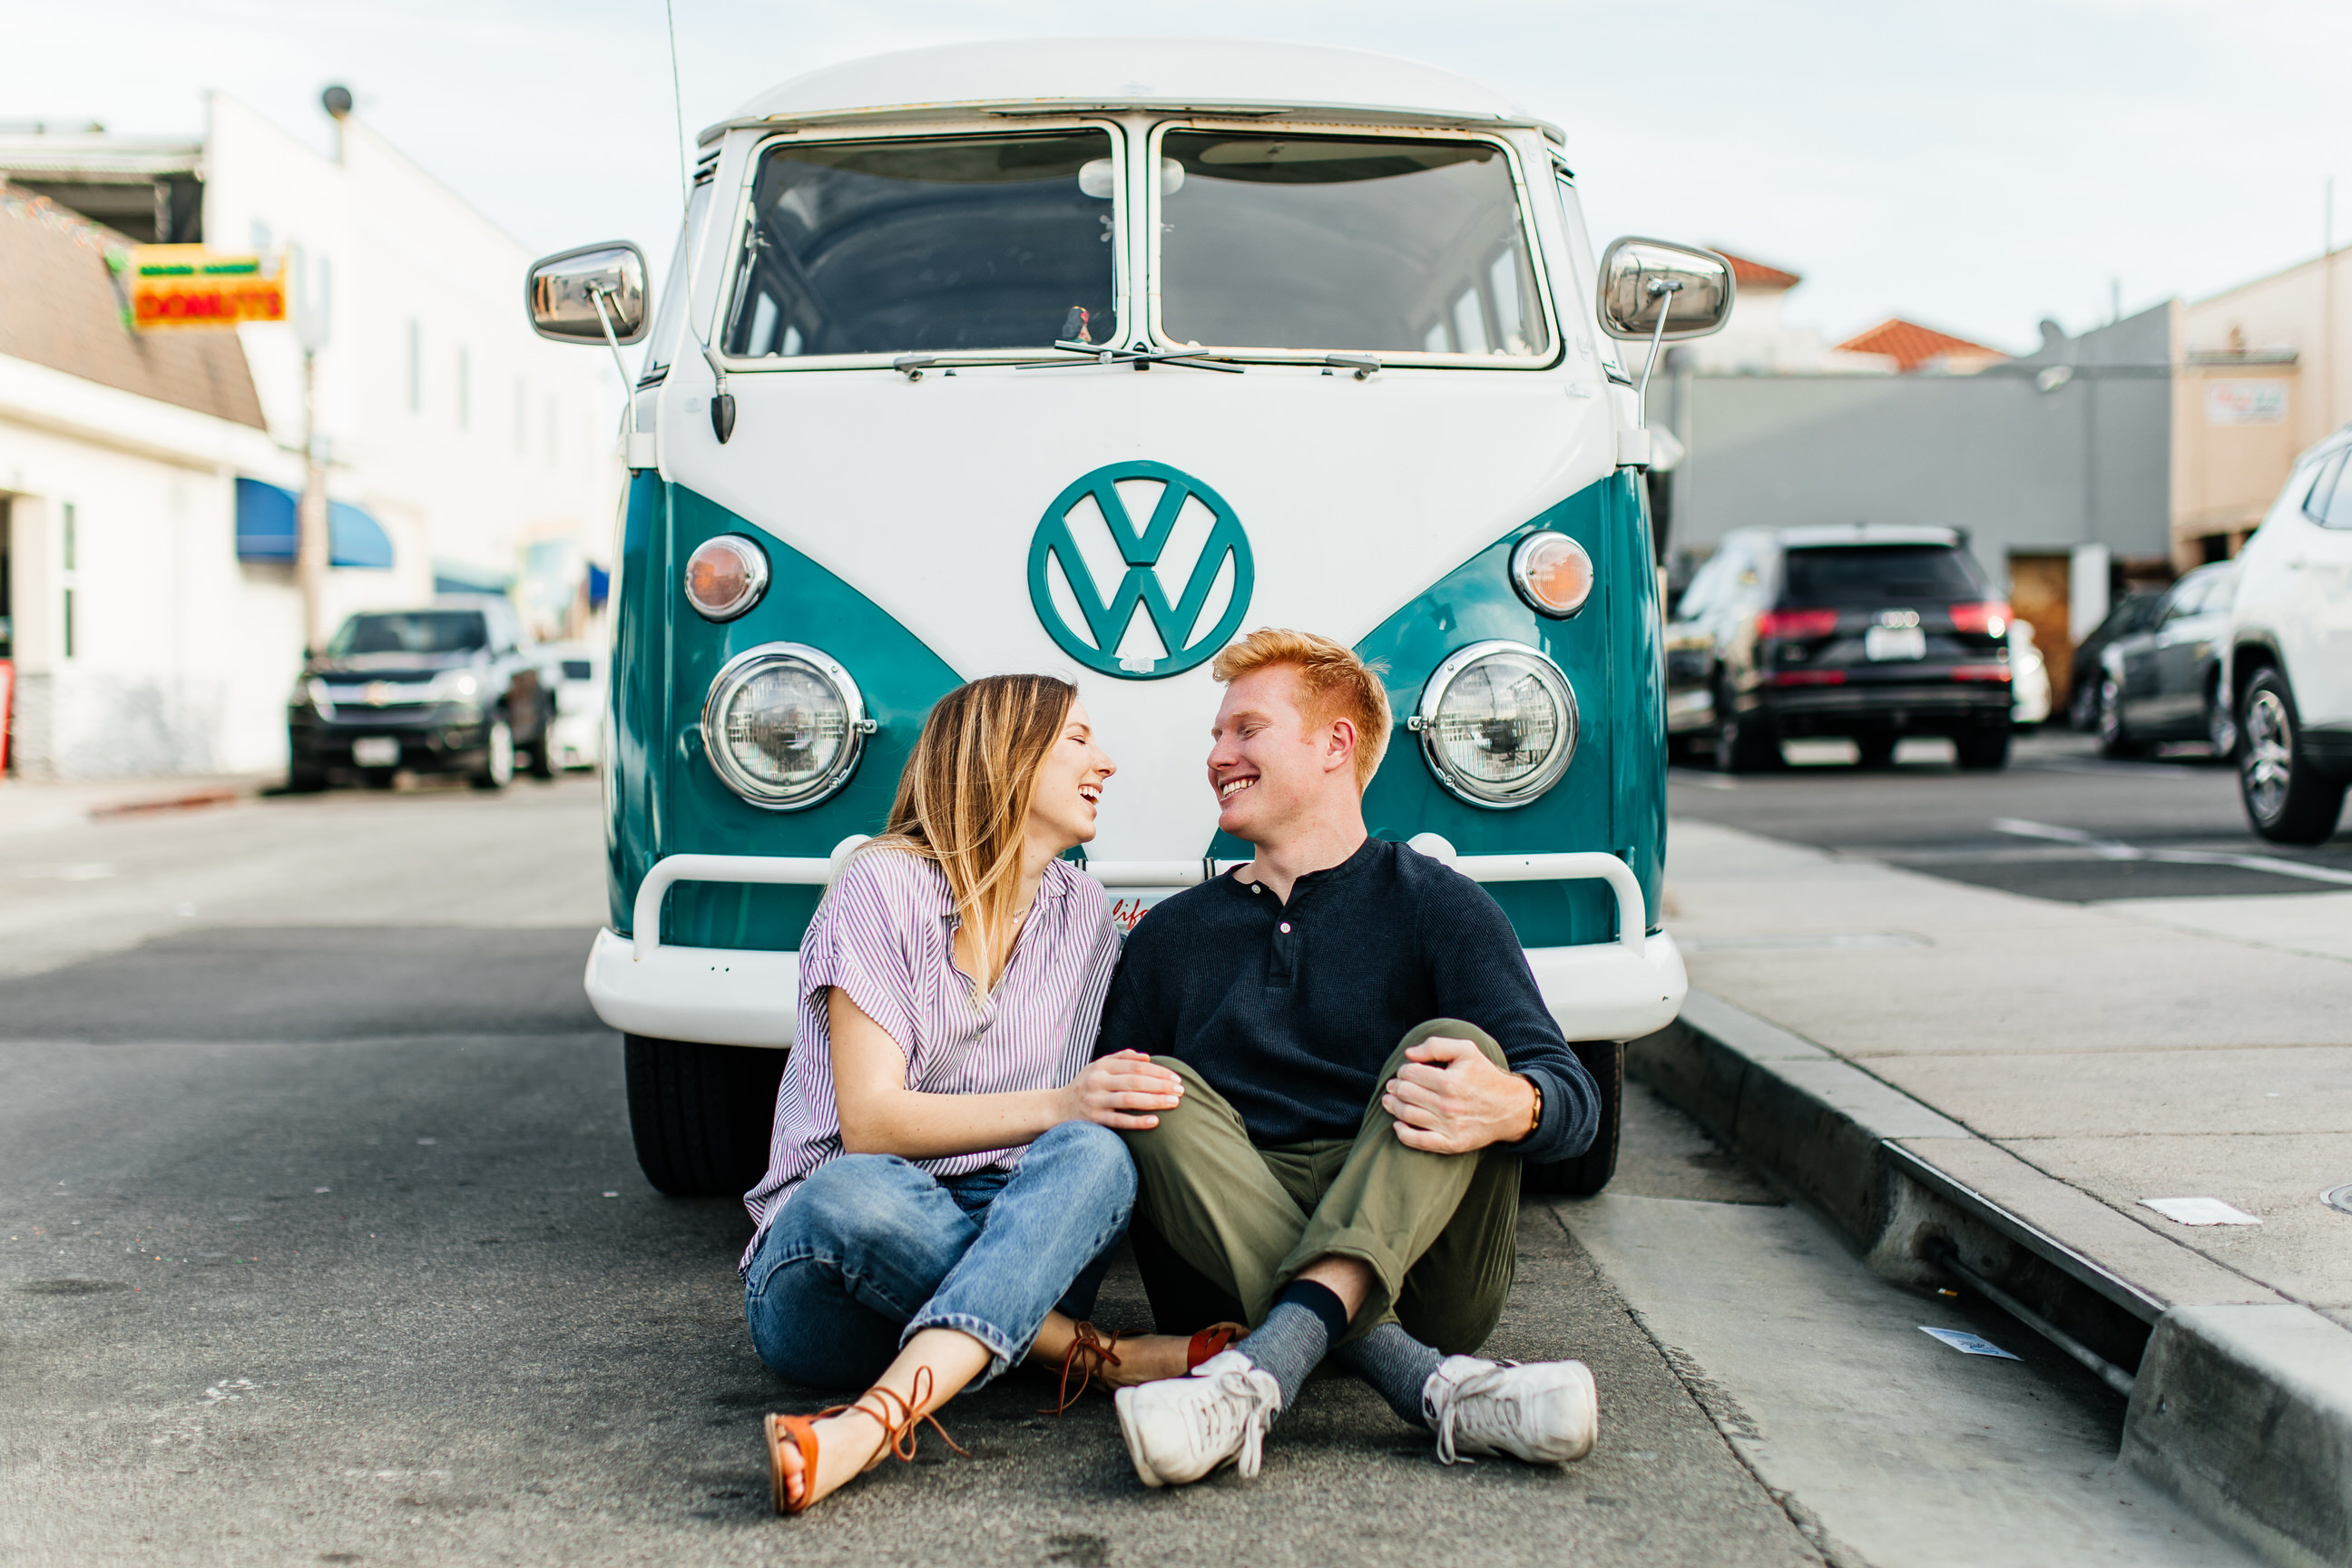 Balboa fun zone engagement photos in Newport Beach couple laughing in front of vintage vw bus